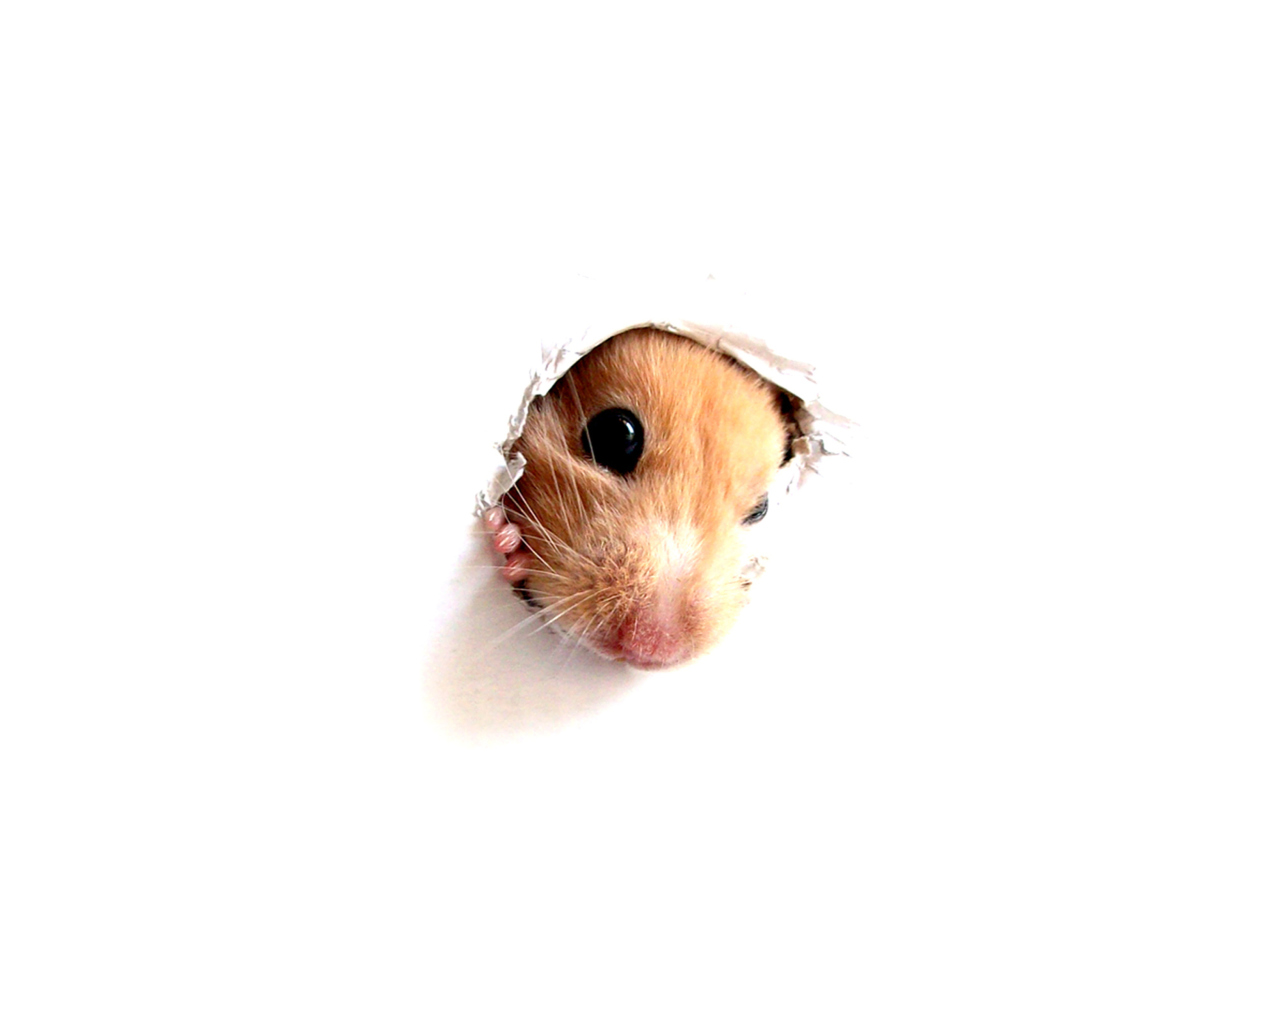 Hamster In Hole On Your Screen wallpaper 1280x1024